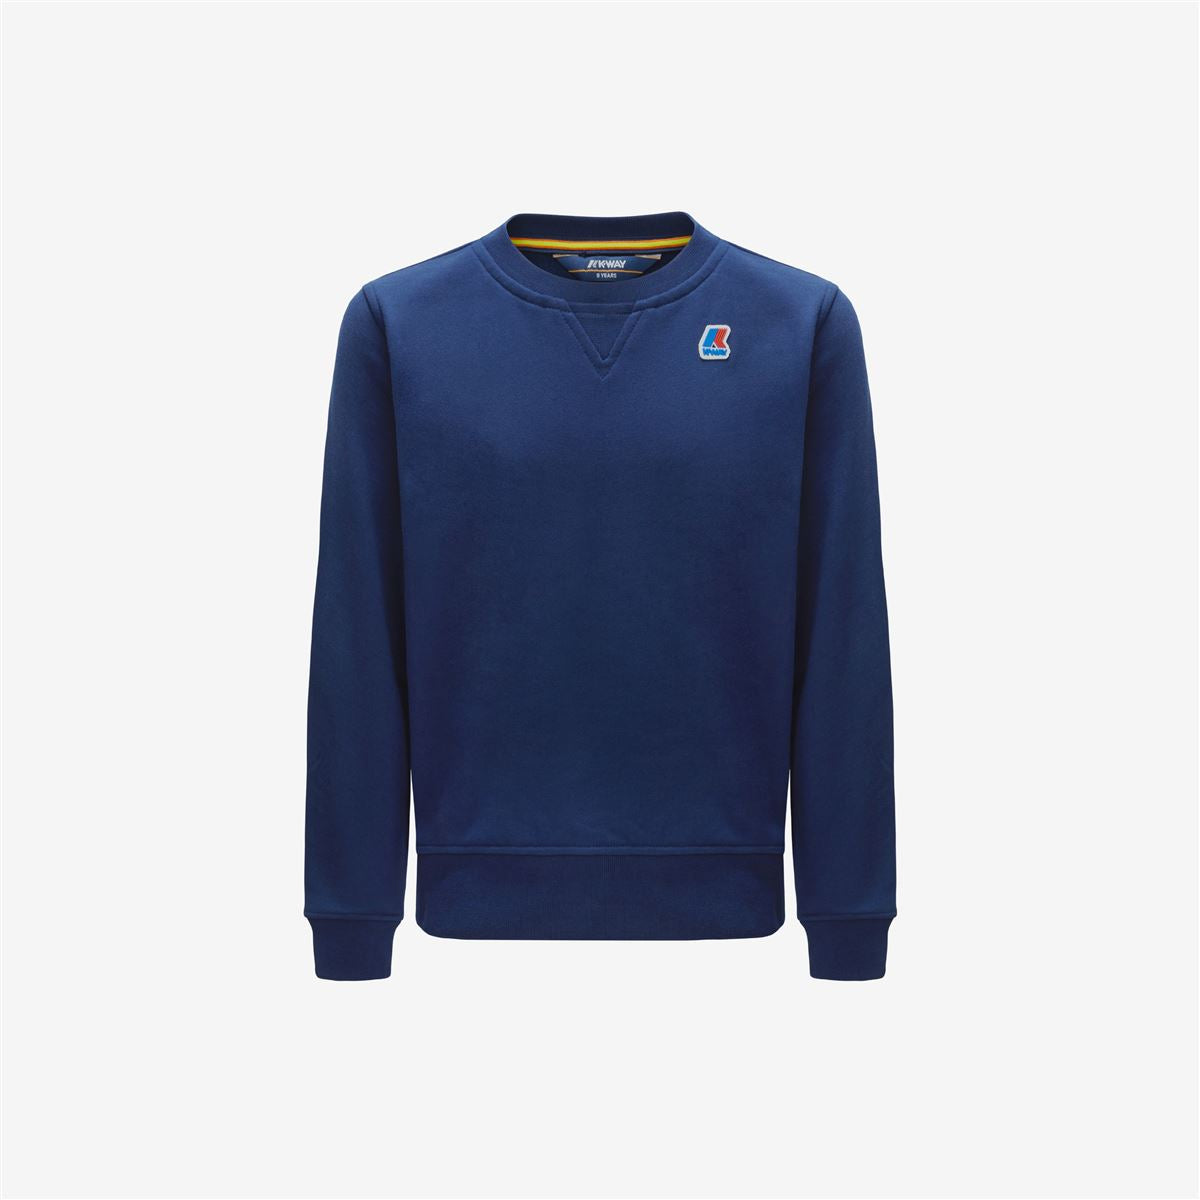 P. BAPTISTE FRENCH TERRY - Fleece - Pull  Over - Boy - Blue Medieval